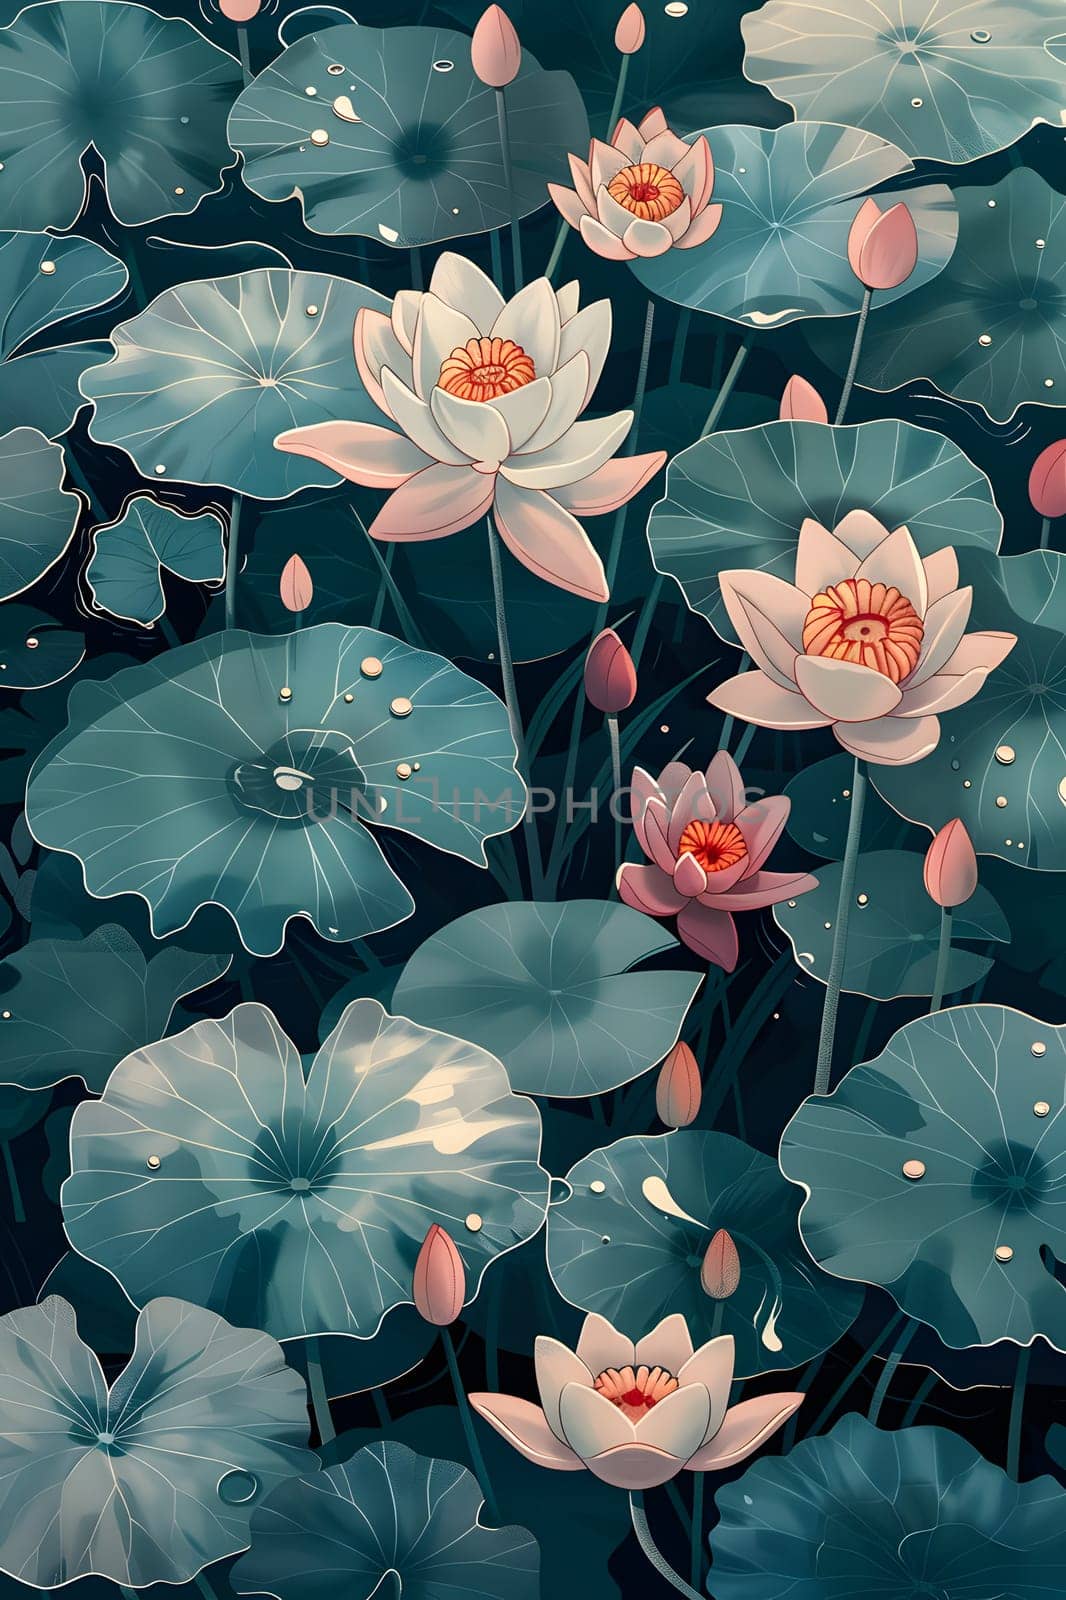 Beautiful painting of lotus flowers and lily pads in pond by Nadtochiy